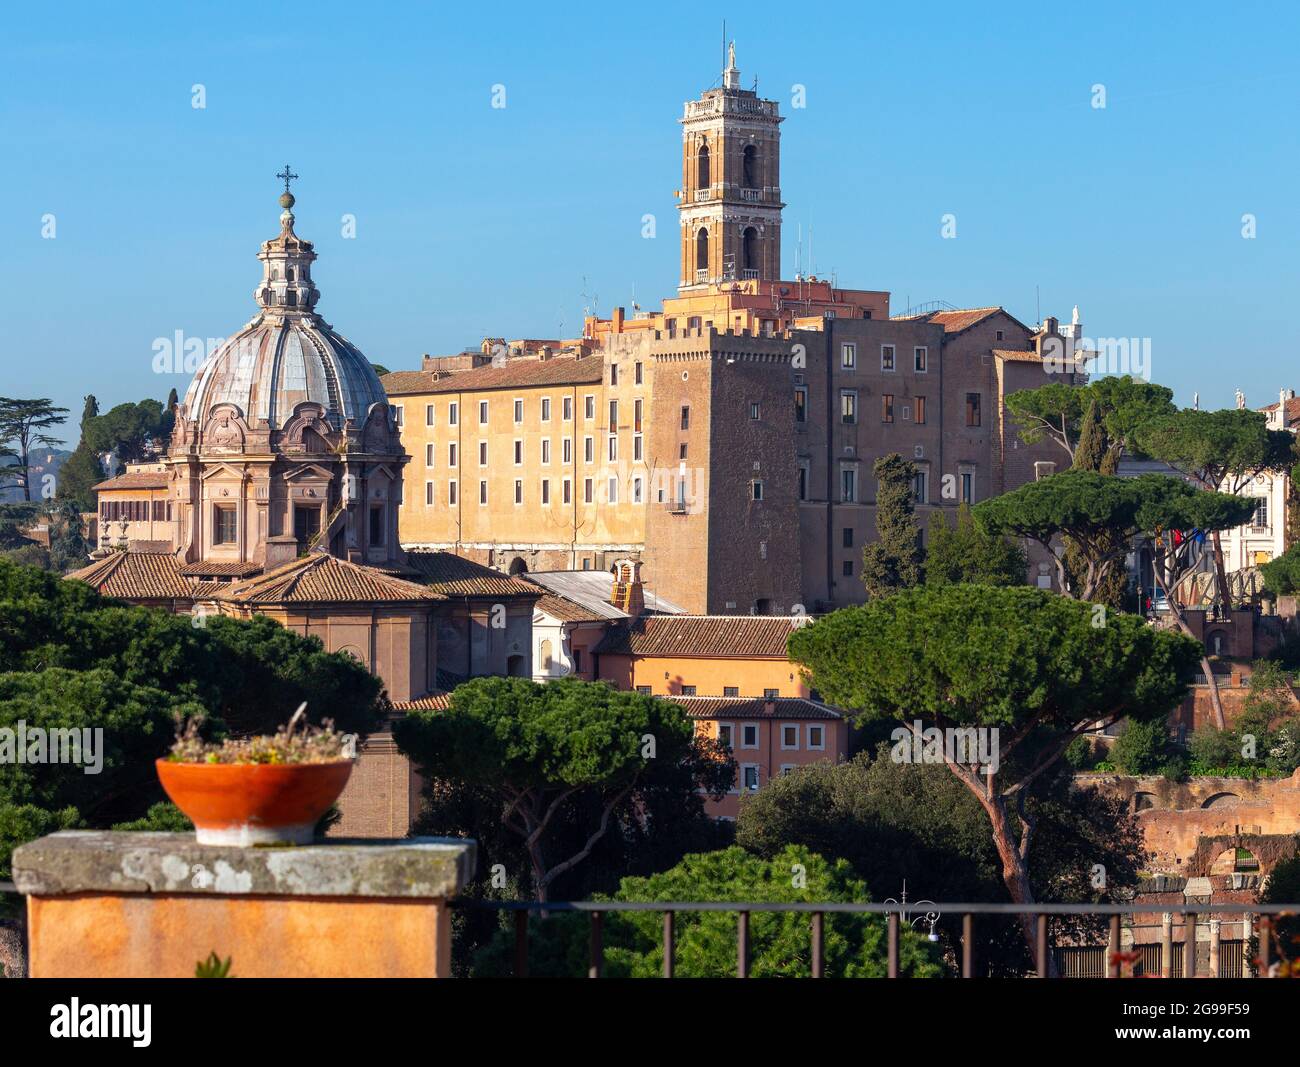 View of the historic center of Rome at sunset. Italy. Stock Photo